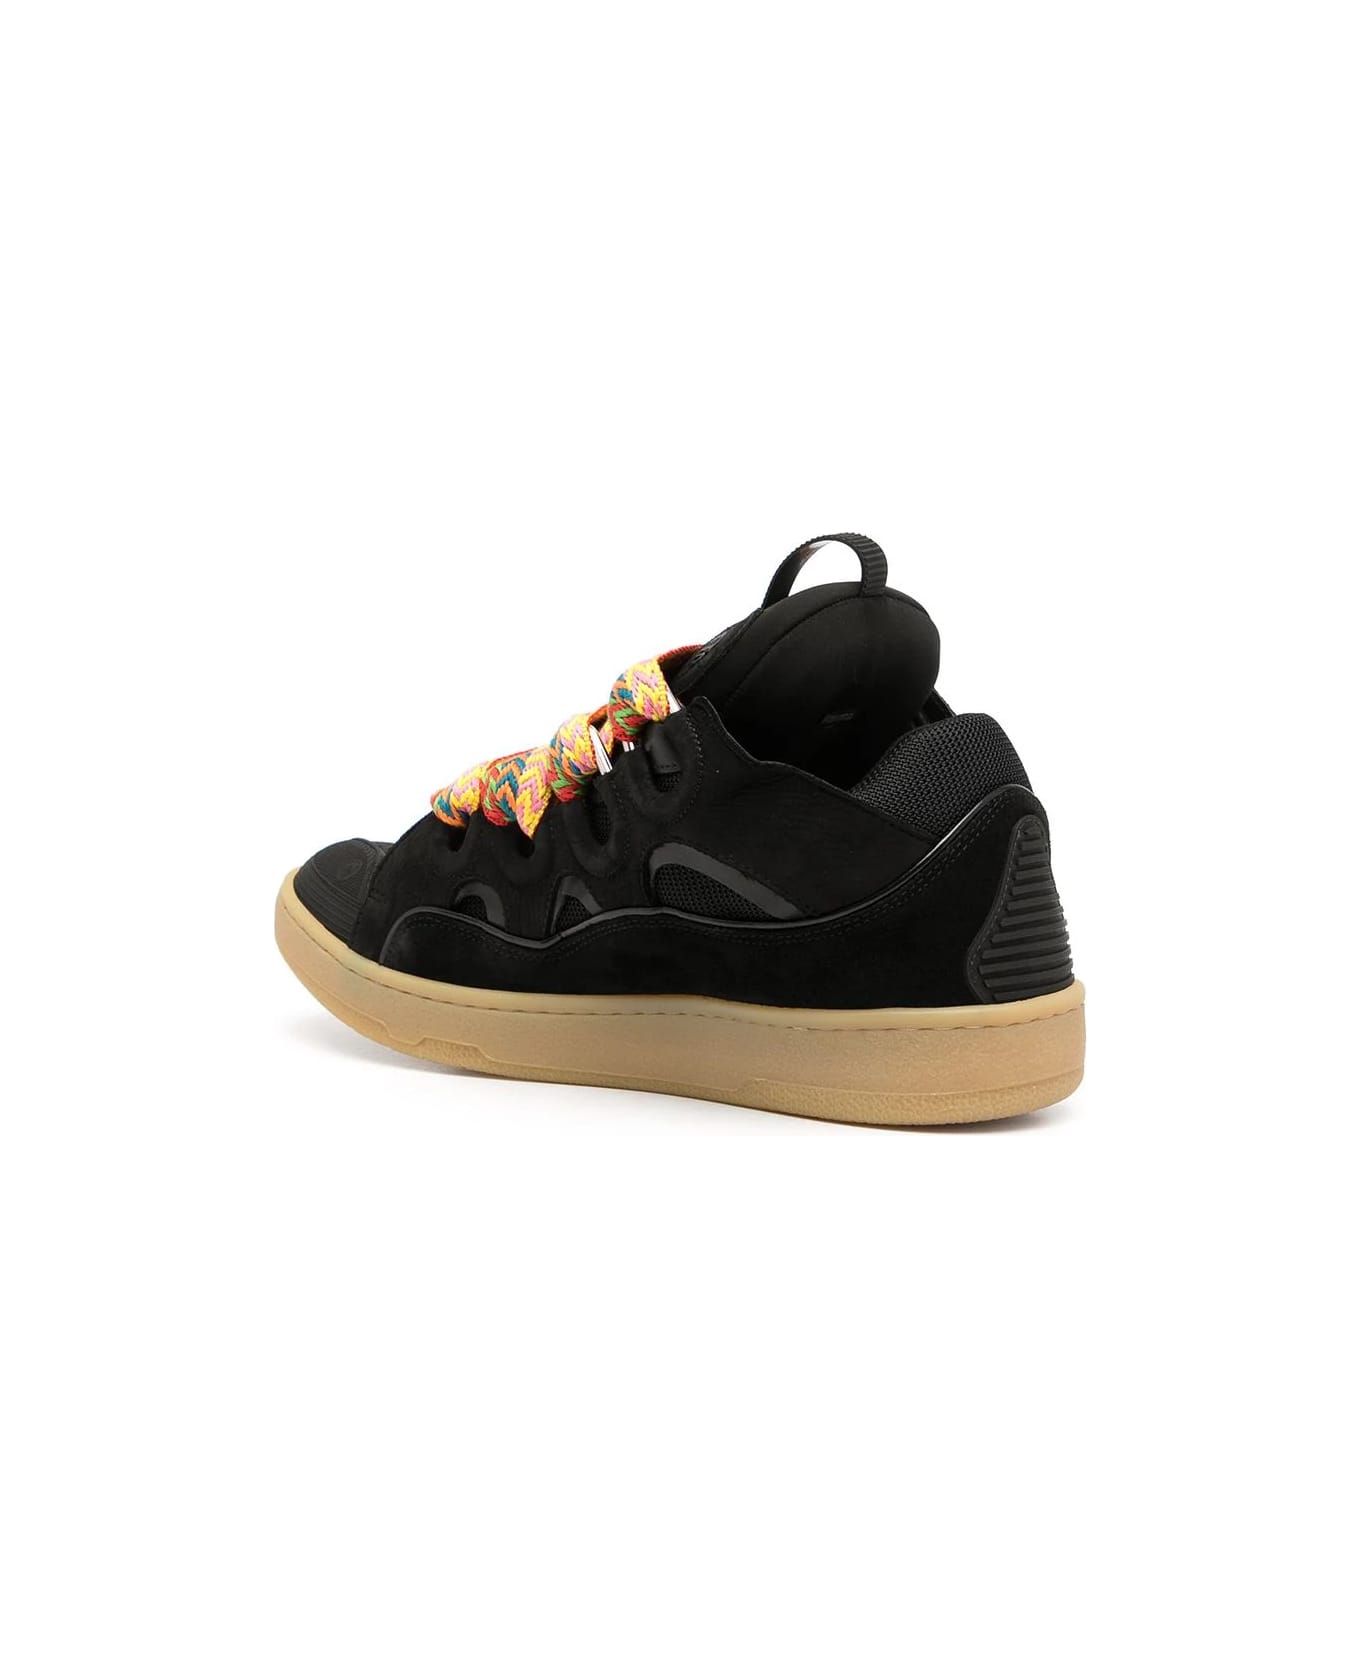 Lanvin "curb" Sneakers In Black Leather - Black スニーカー